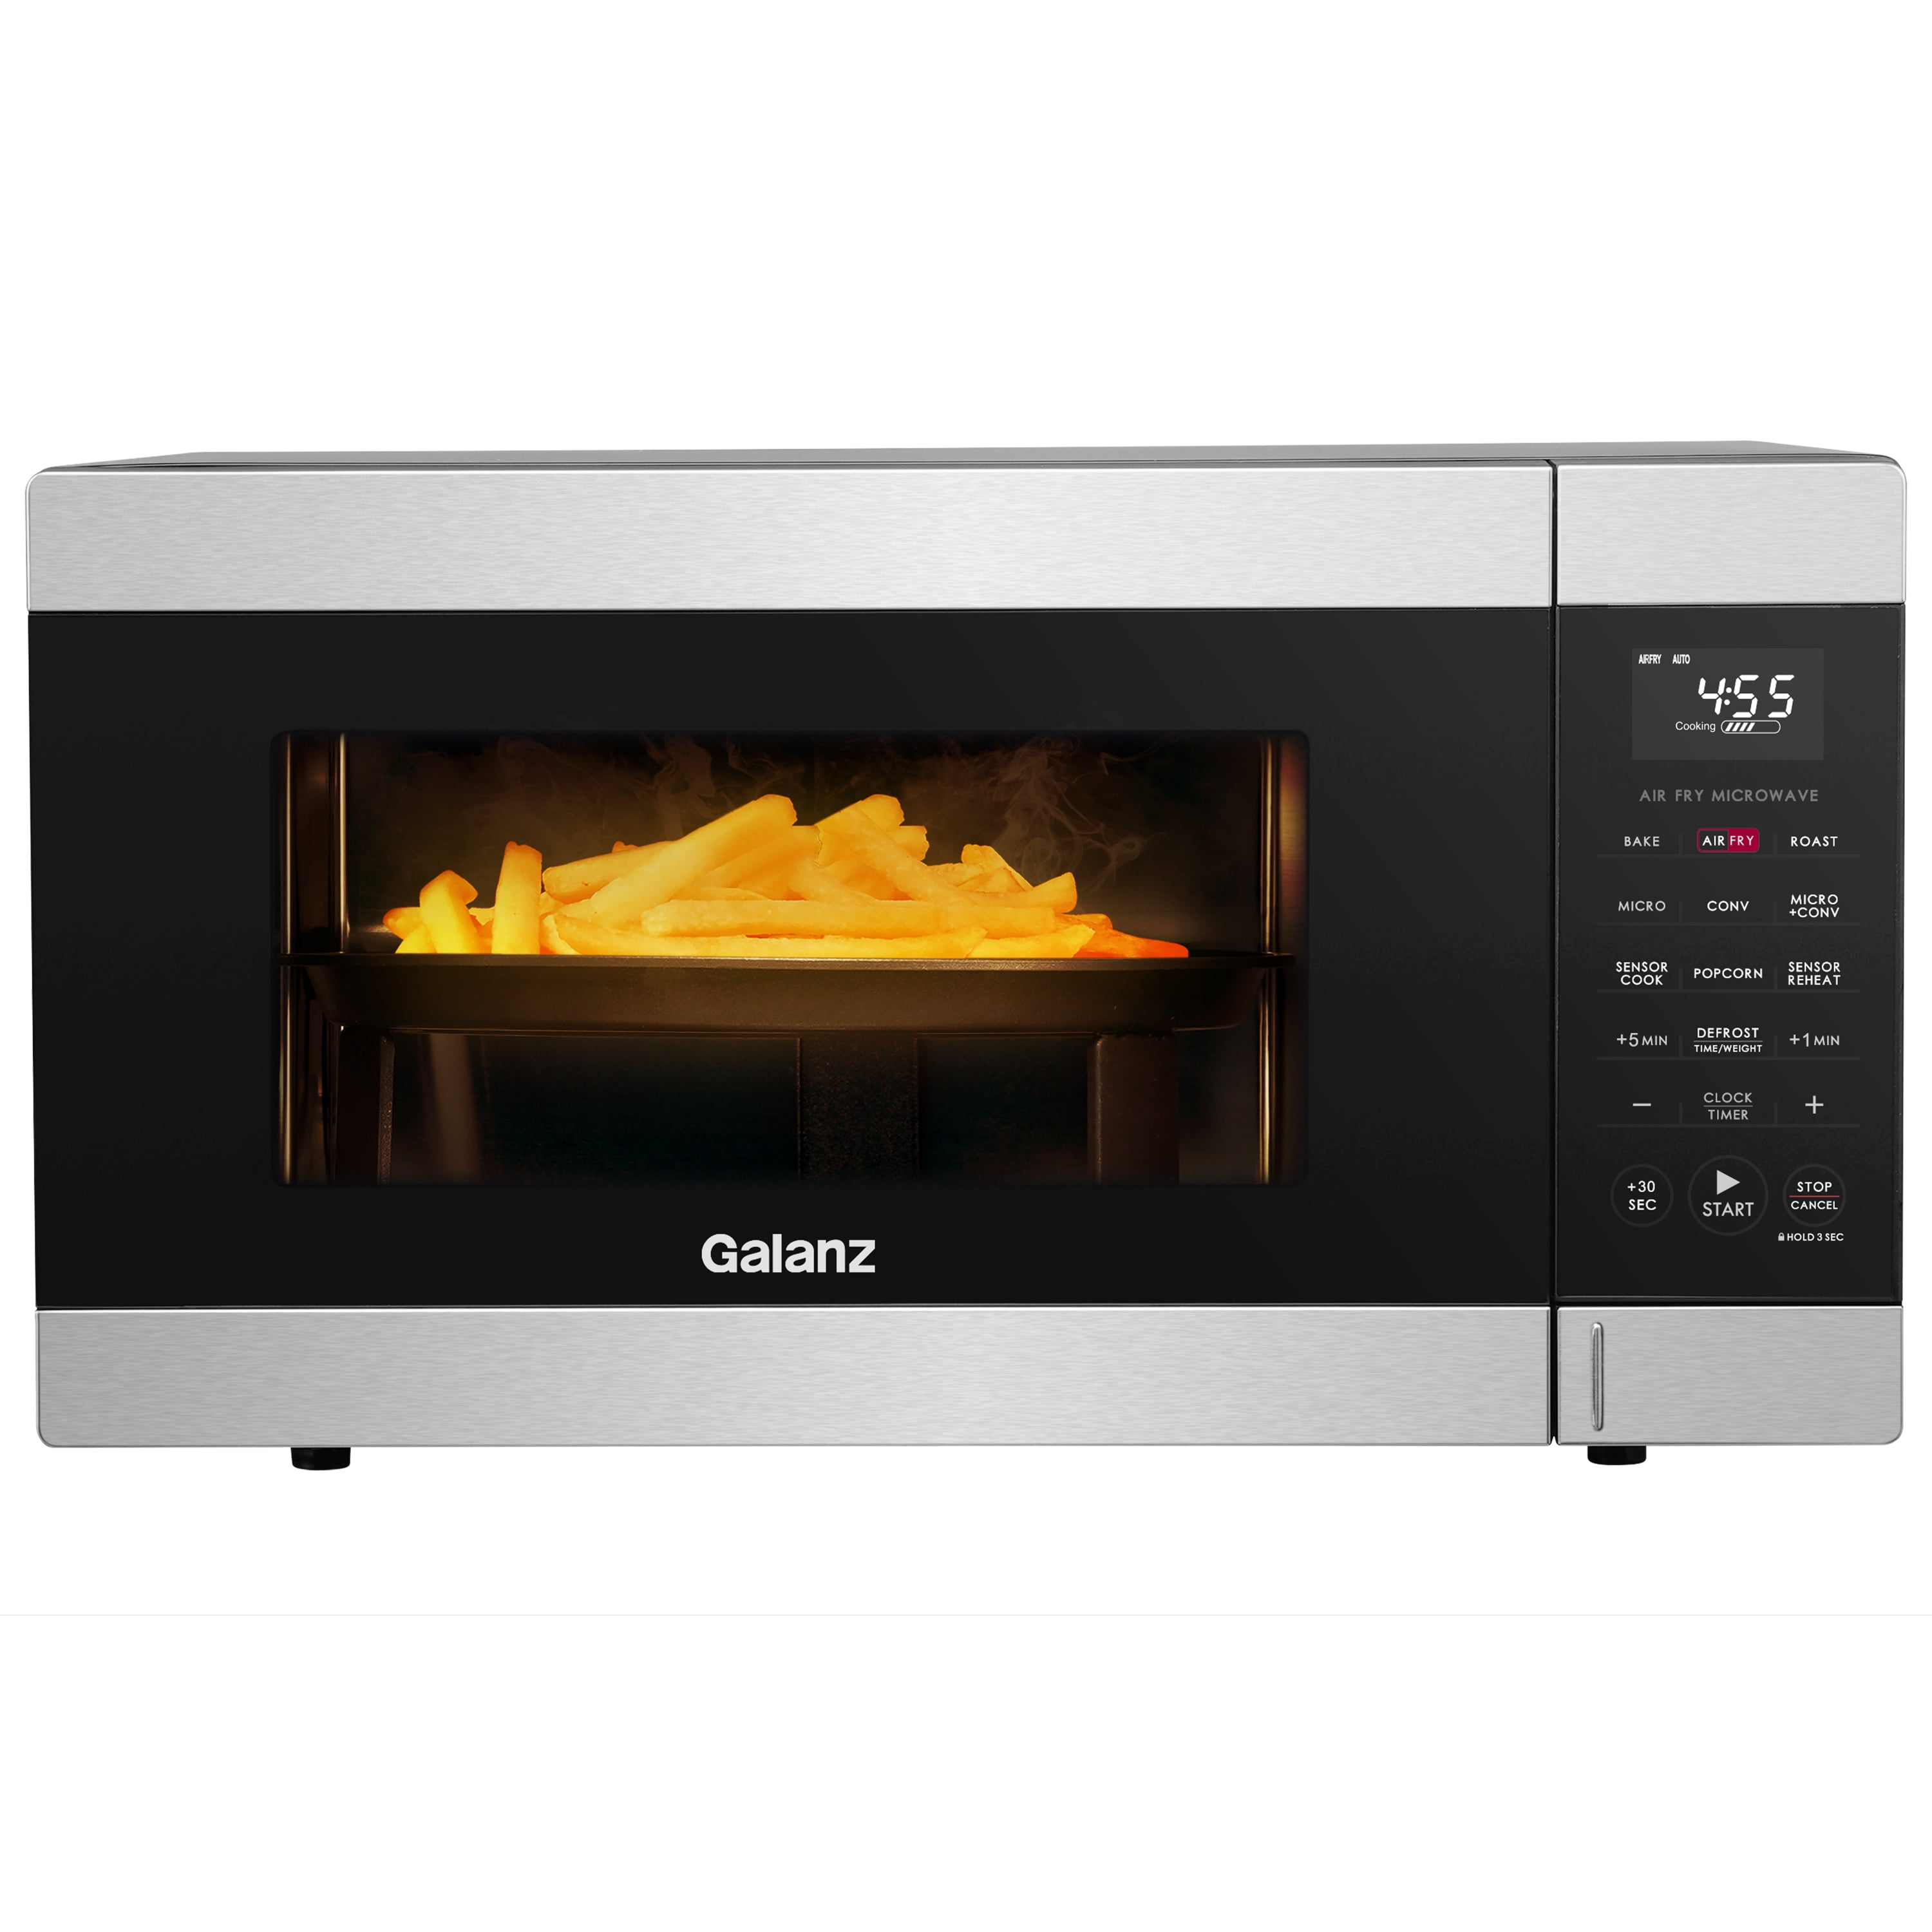 galanz microwave +air fryer combo 1000watts 1.2cu.ft for Sale in